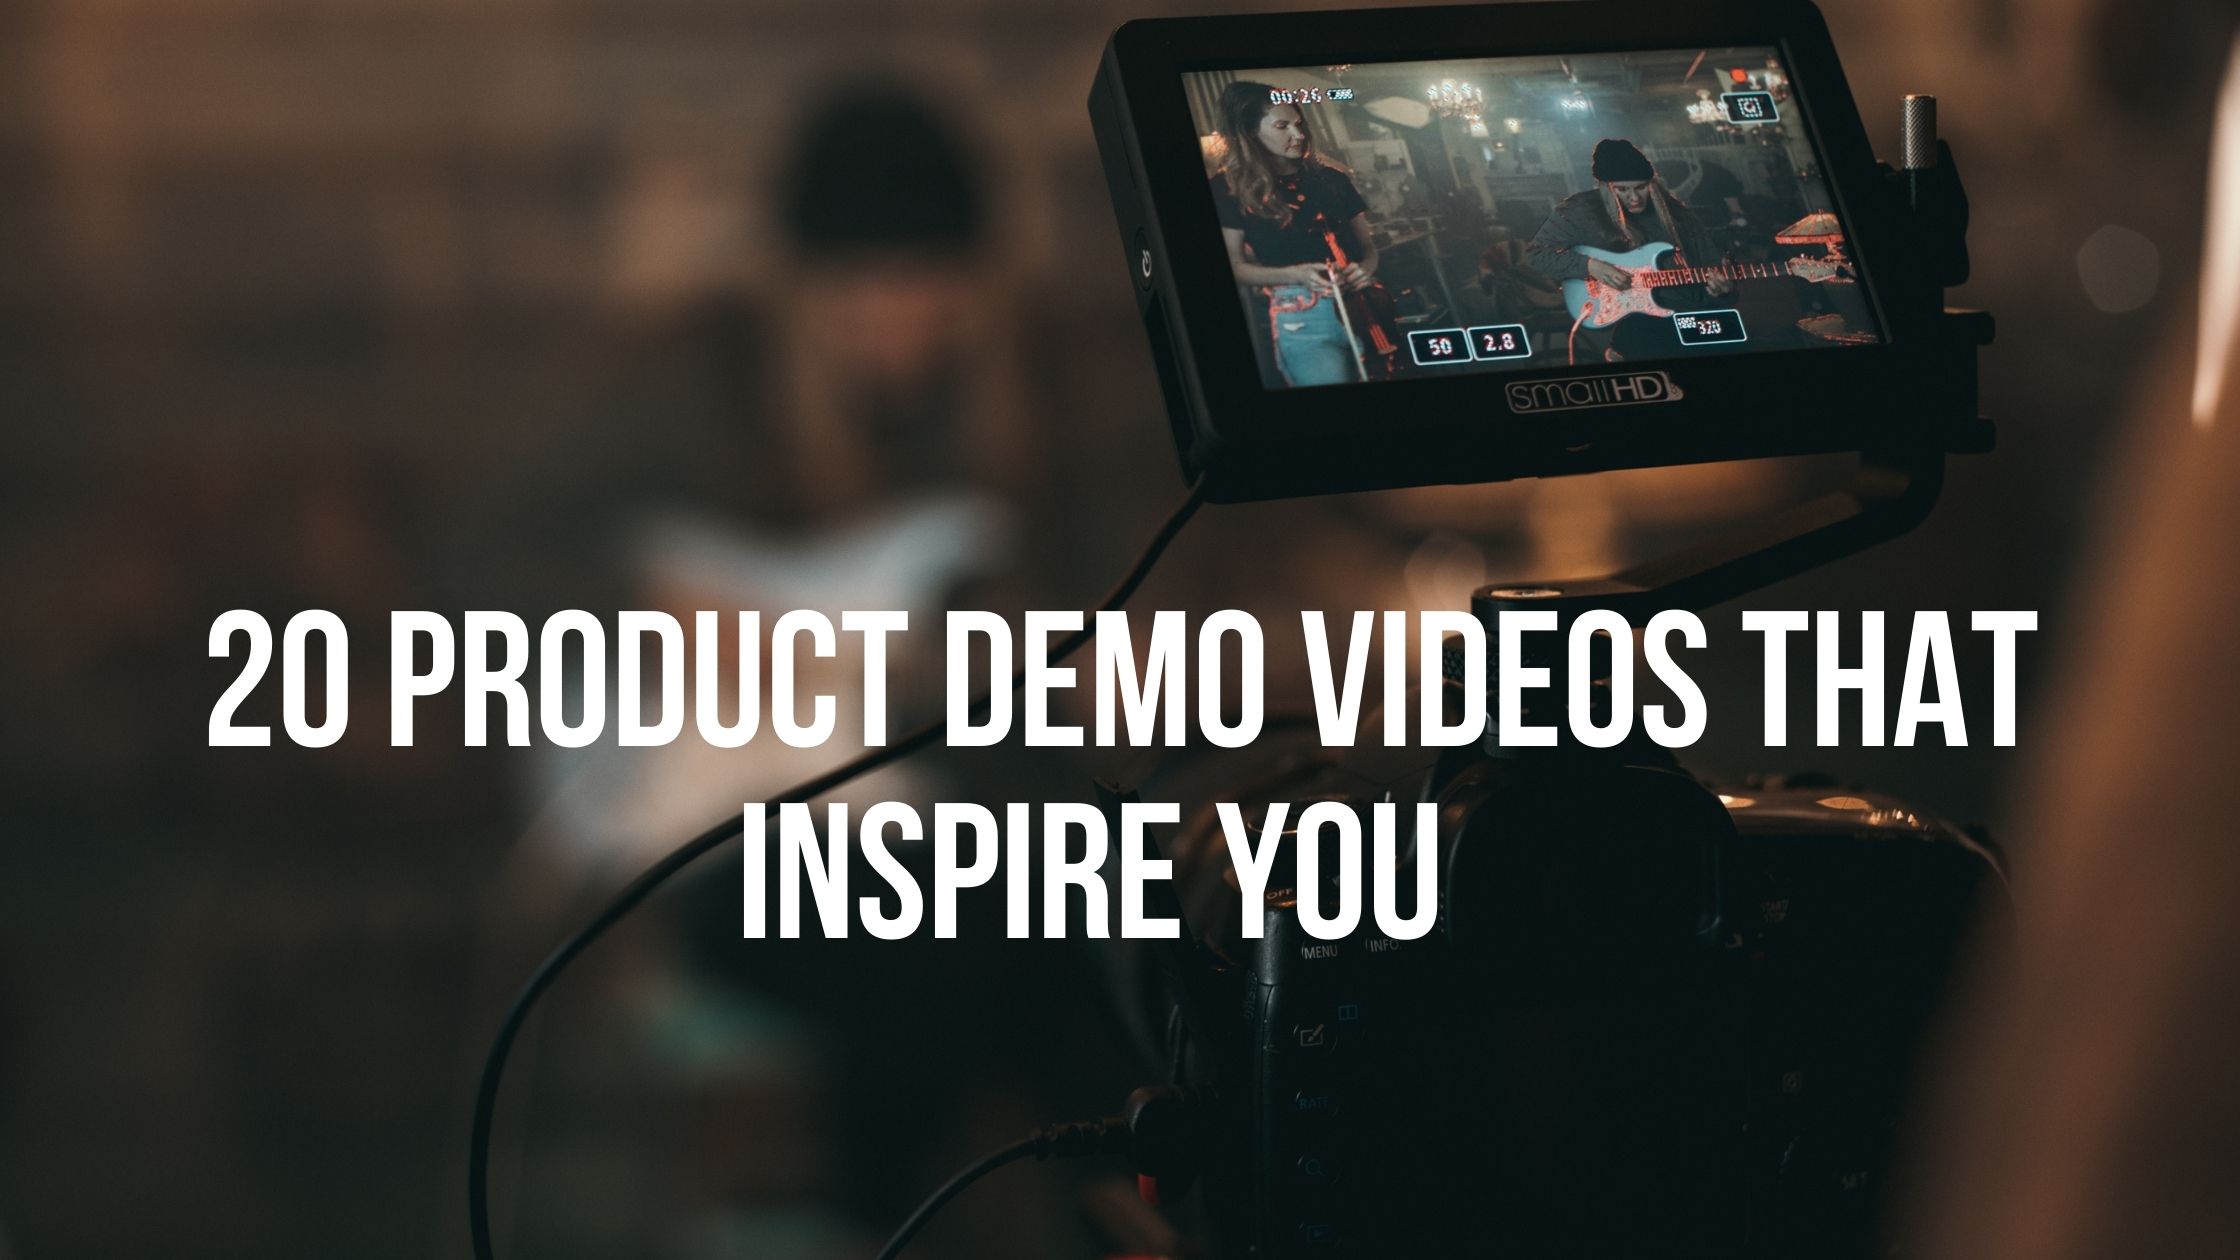 20 Product Demo Videos that Inspire You